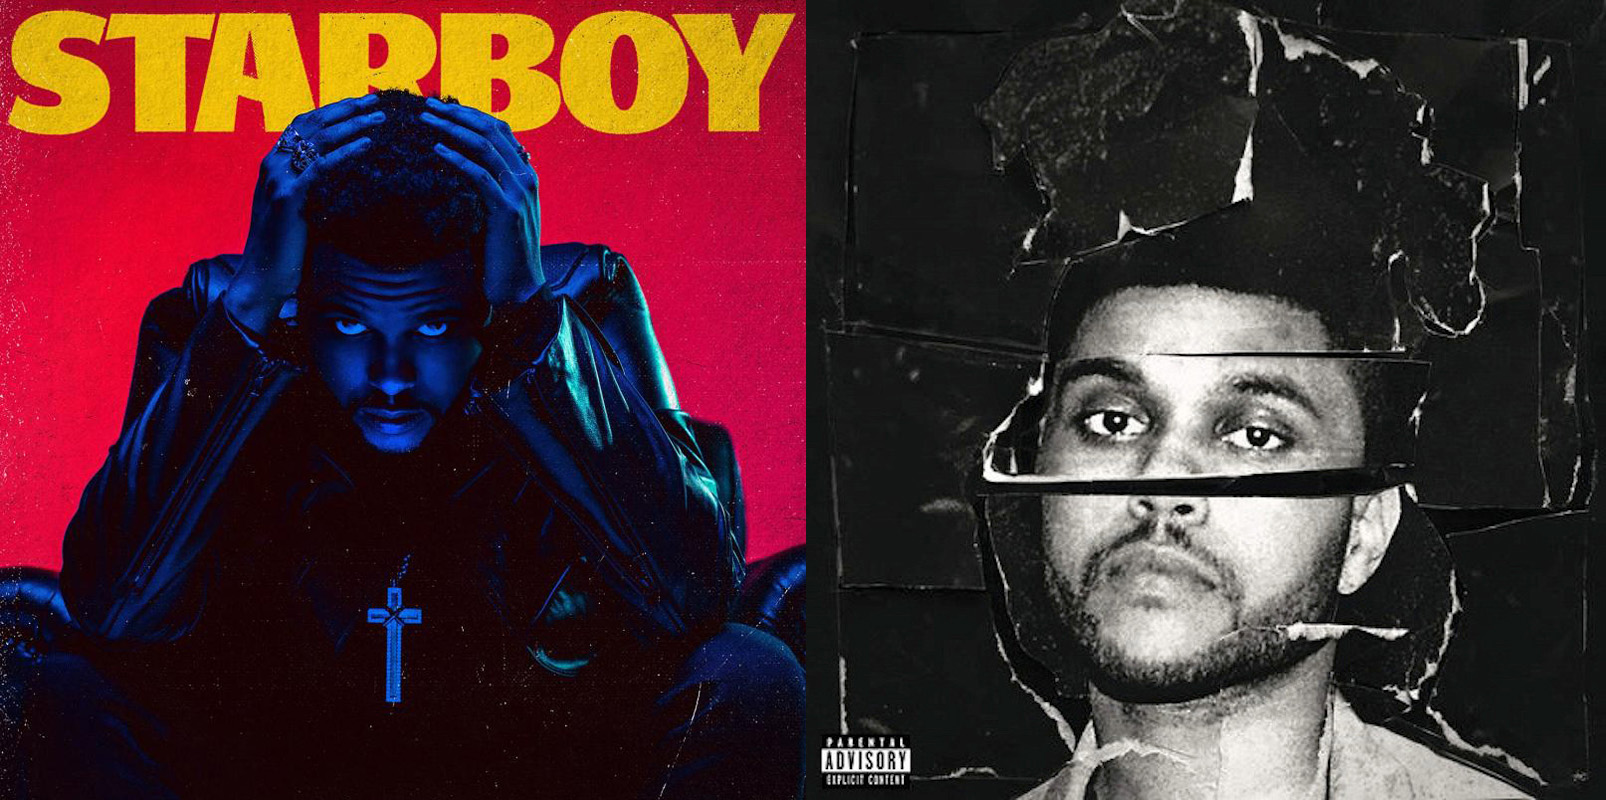 The Weeknd 'Starboy' Red Tux Poster